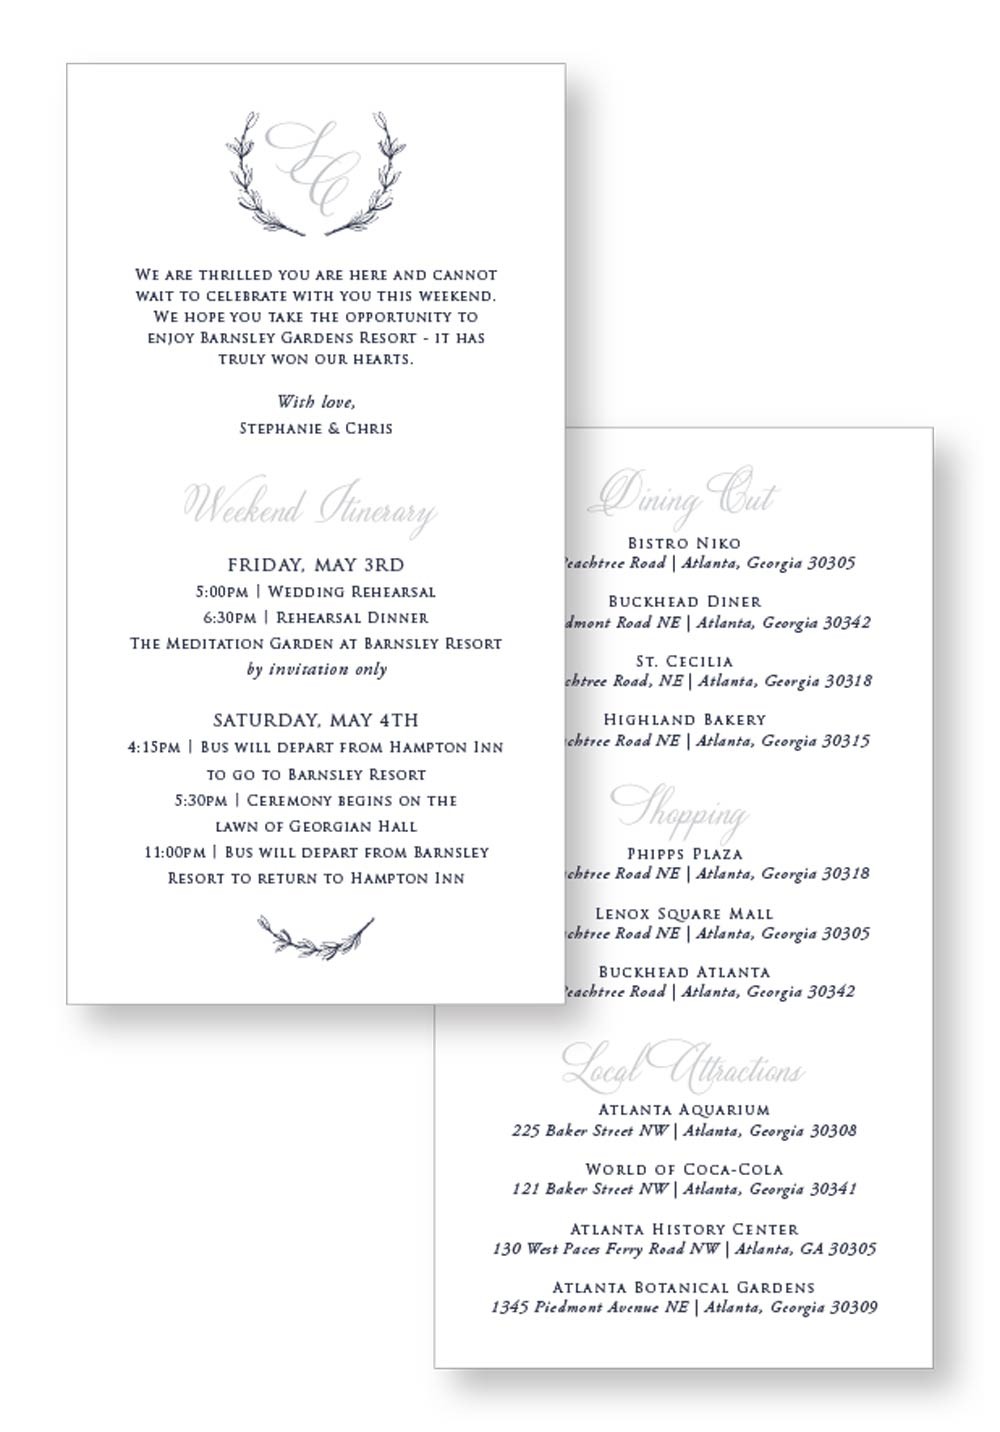 Azalea | Classic Wedding Weekend Schedule and Itinerary | Paper Daisies Stationery